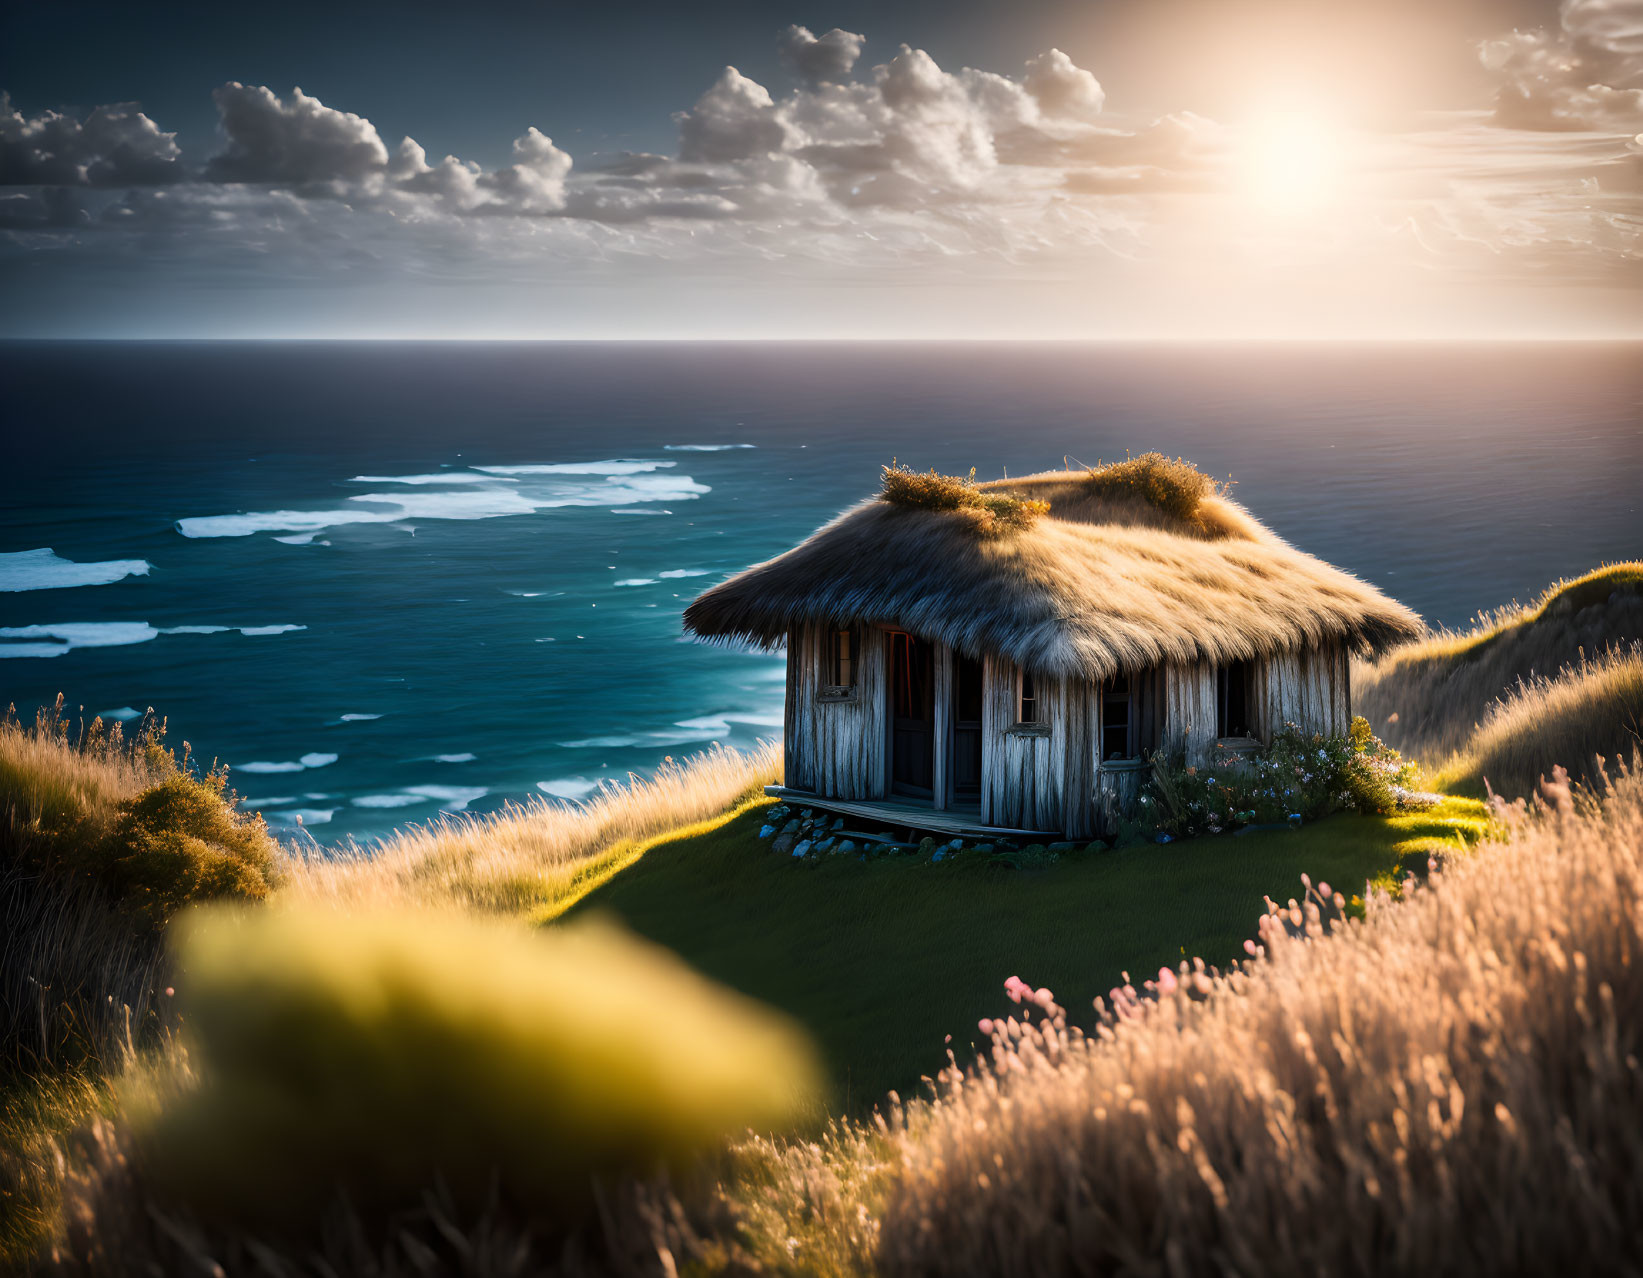 An old hut looking out a the vast ocean